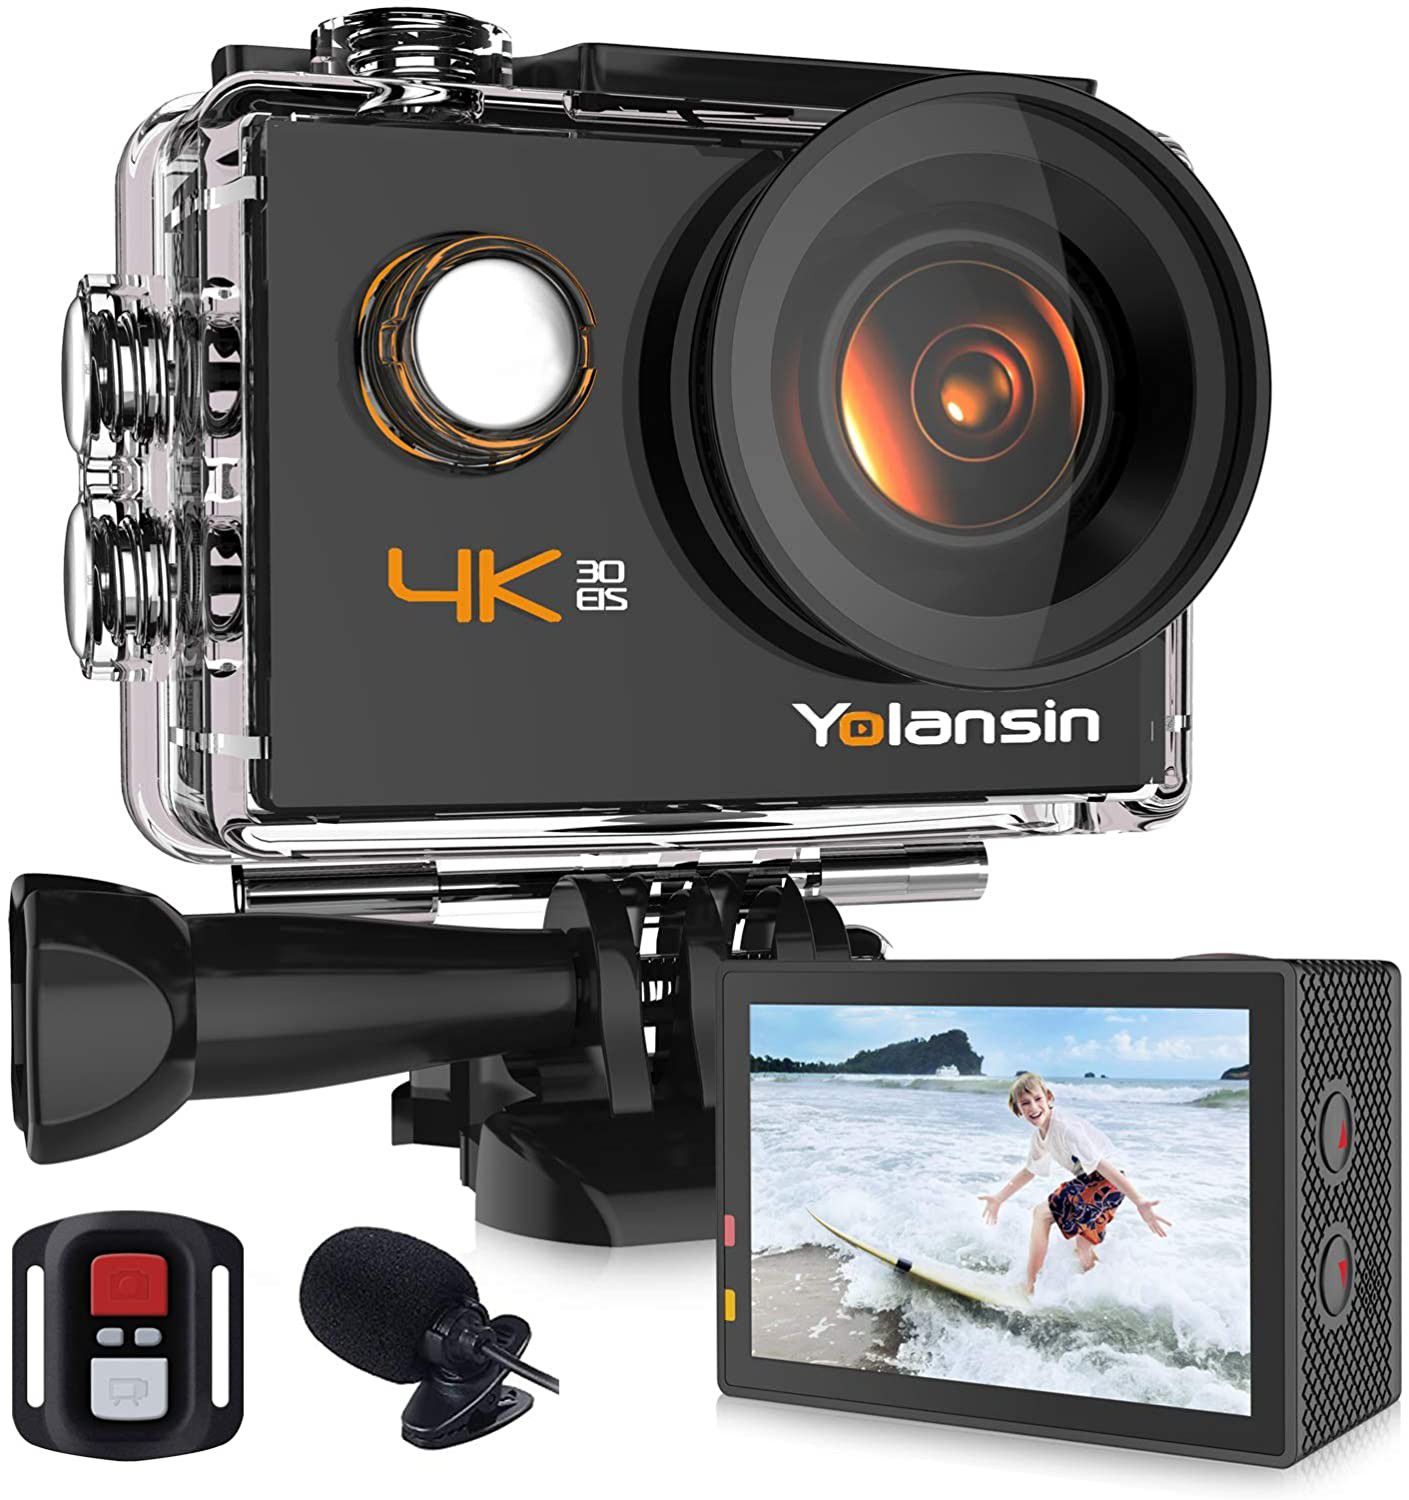 4K Action Camera 20MP 40M Waterproof with 170° Wide Angle Ultra HD DV Camcorder with 2.4G Remote Control 2 Batteries Mounting Accessories